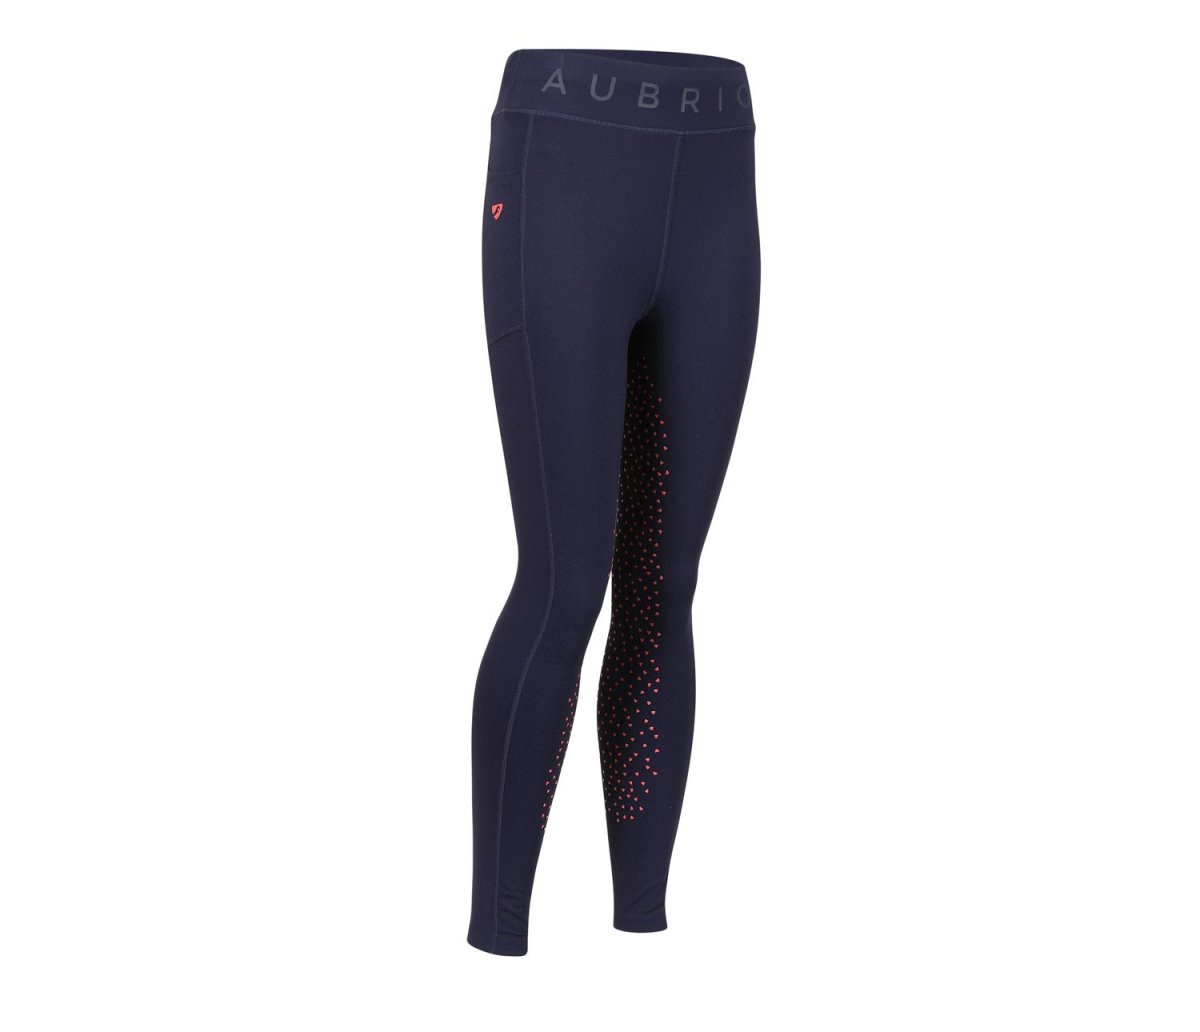 Aubrion SS24 Non Stop Riding Tights - Young Rider - Navy - 7/8 Years